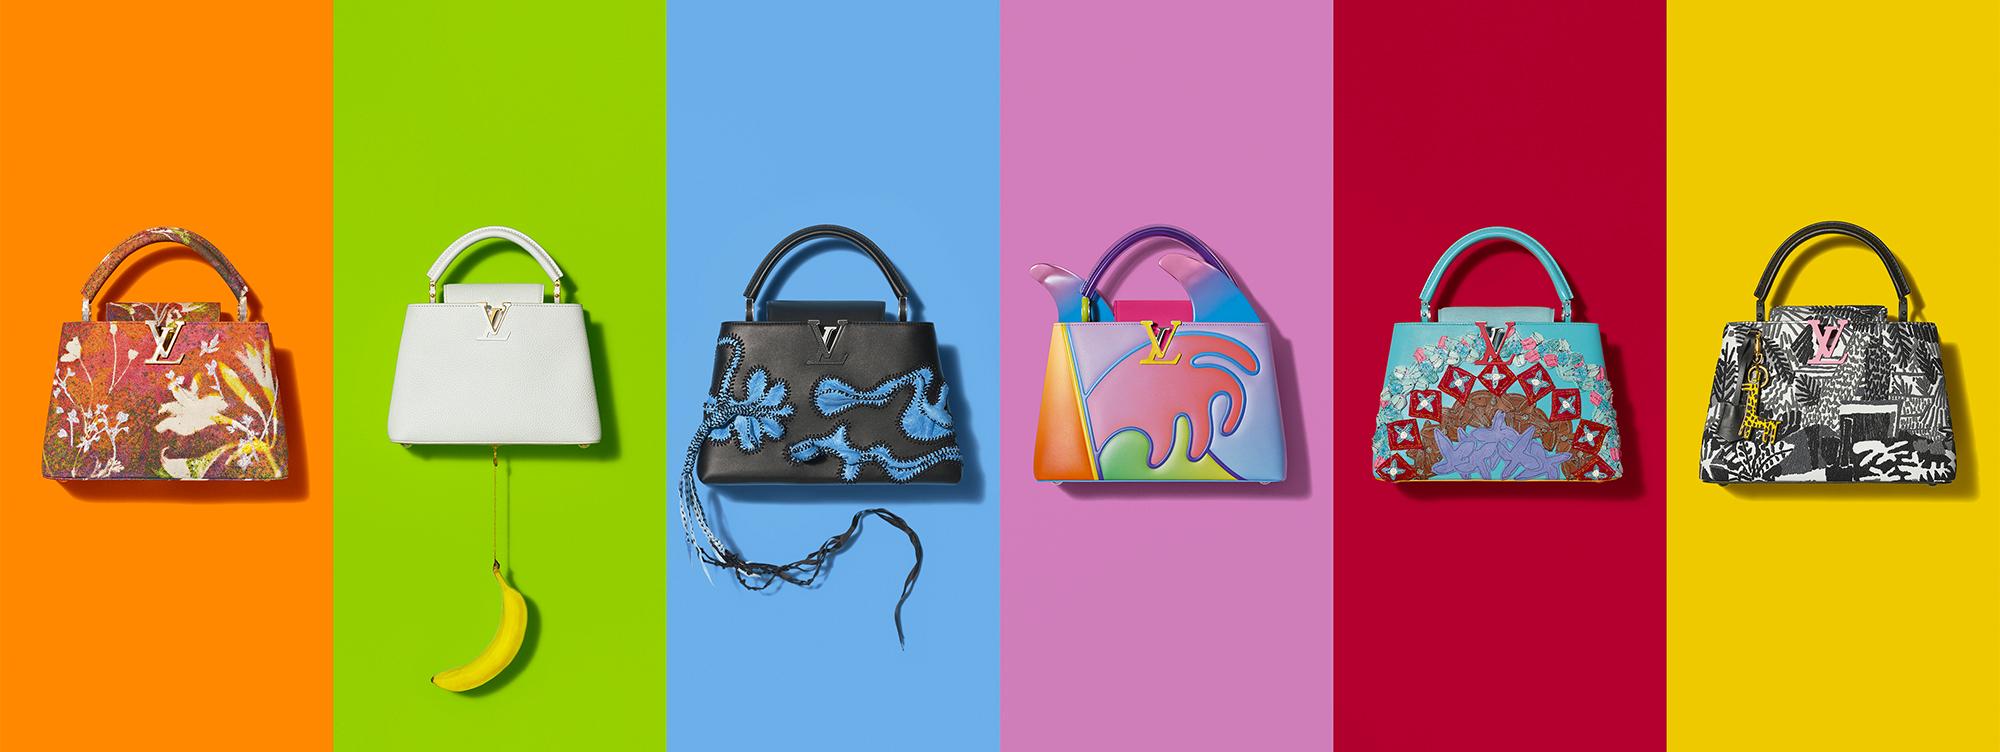 The latest Louis Vuitton Artycapucines collection is a celebration